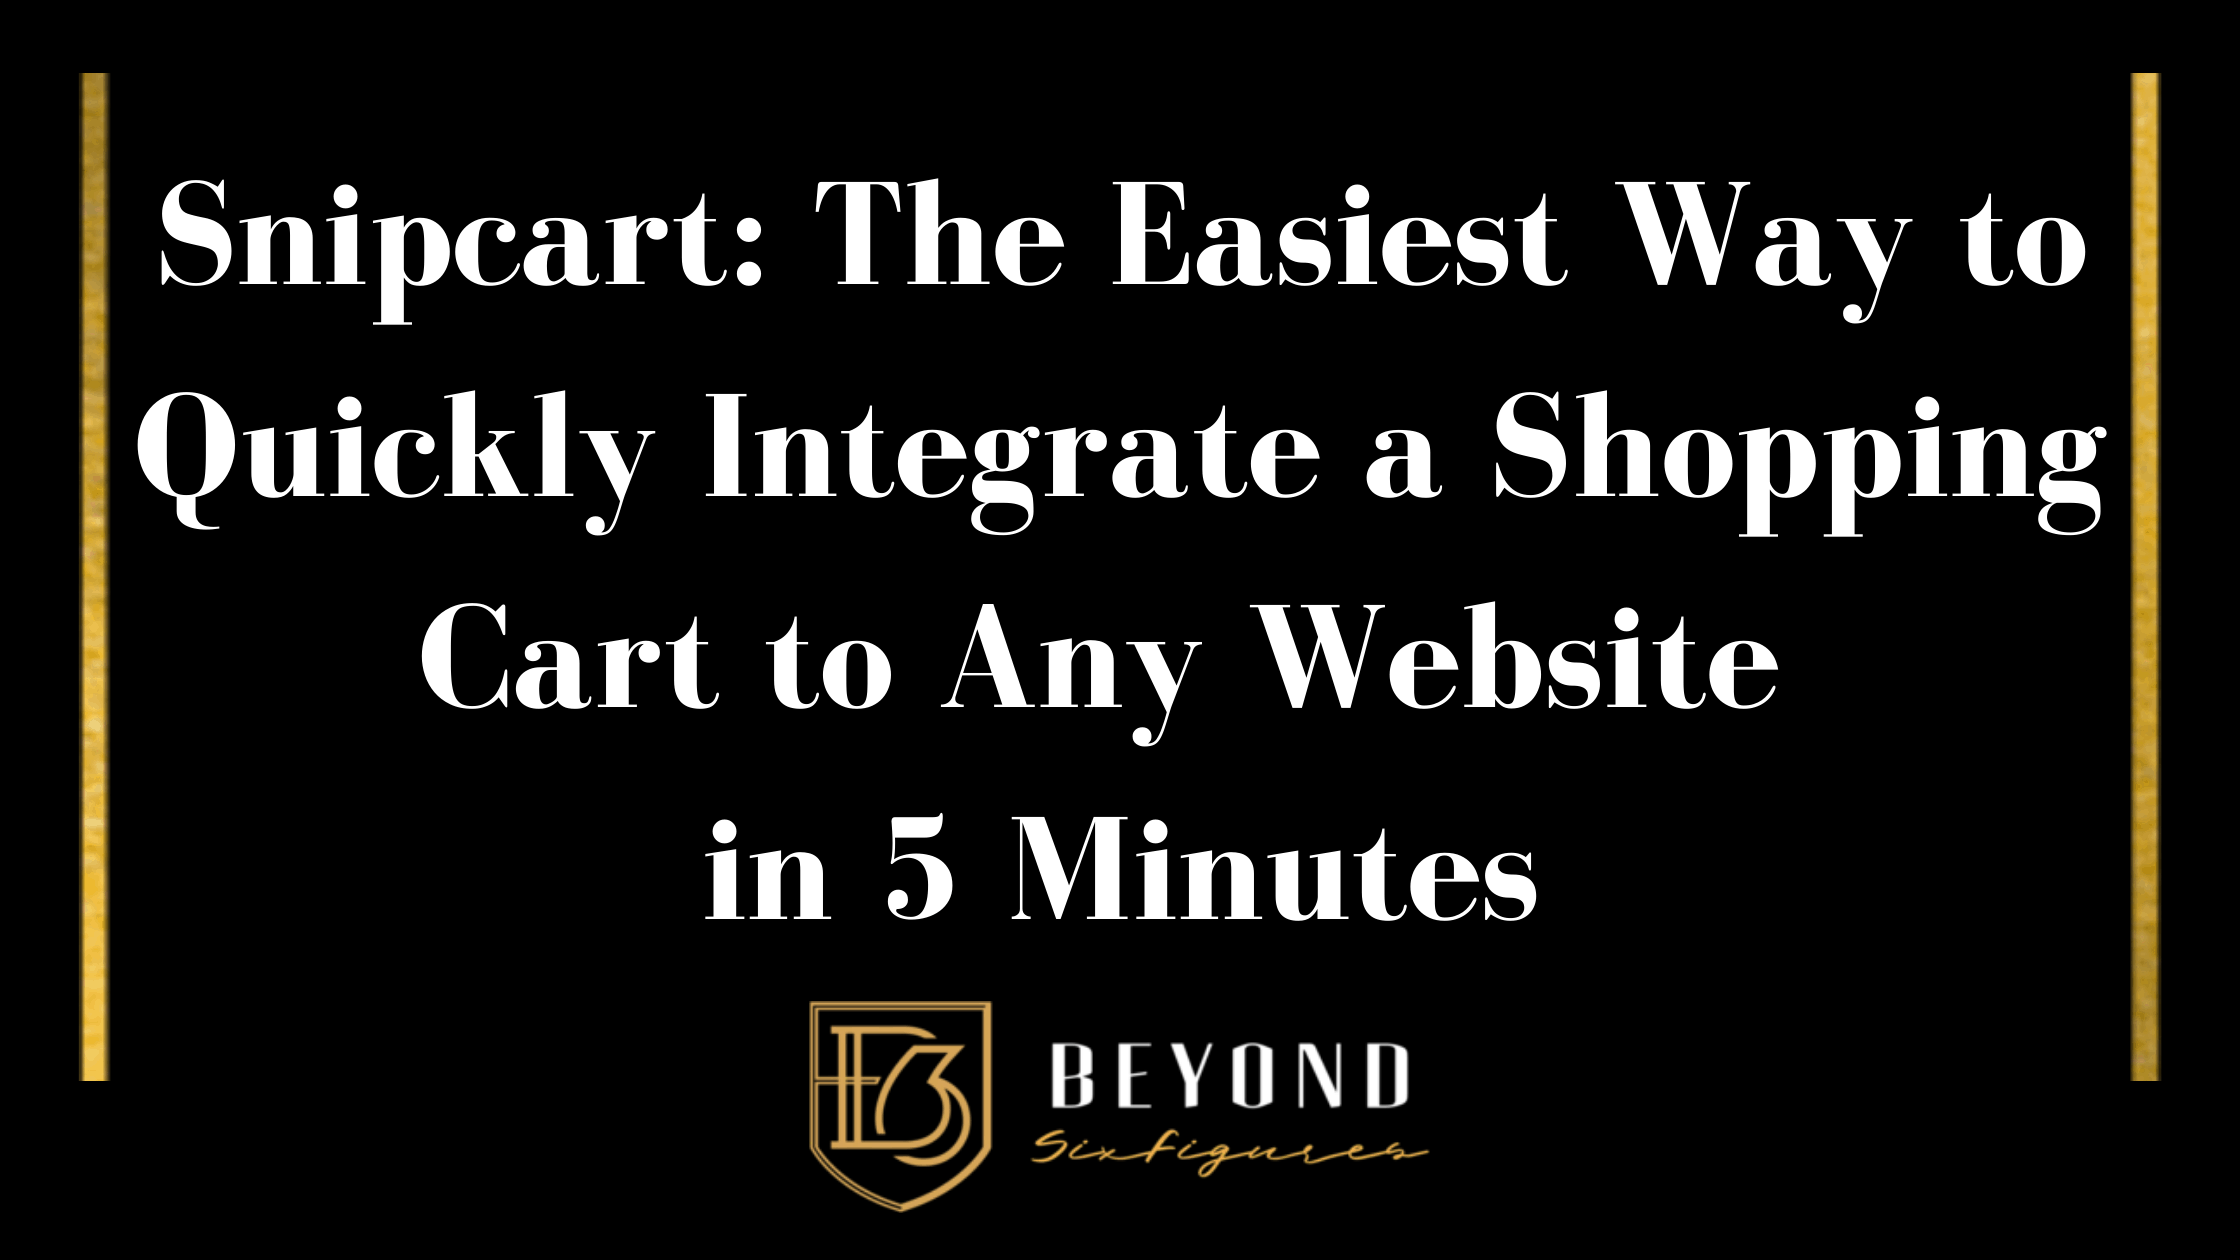 Blog Banner for Snipcart: The Easiest Way to Quickly Integrate a Shopping Cart to Any Website in 5 Minutes